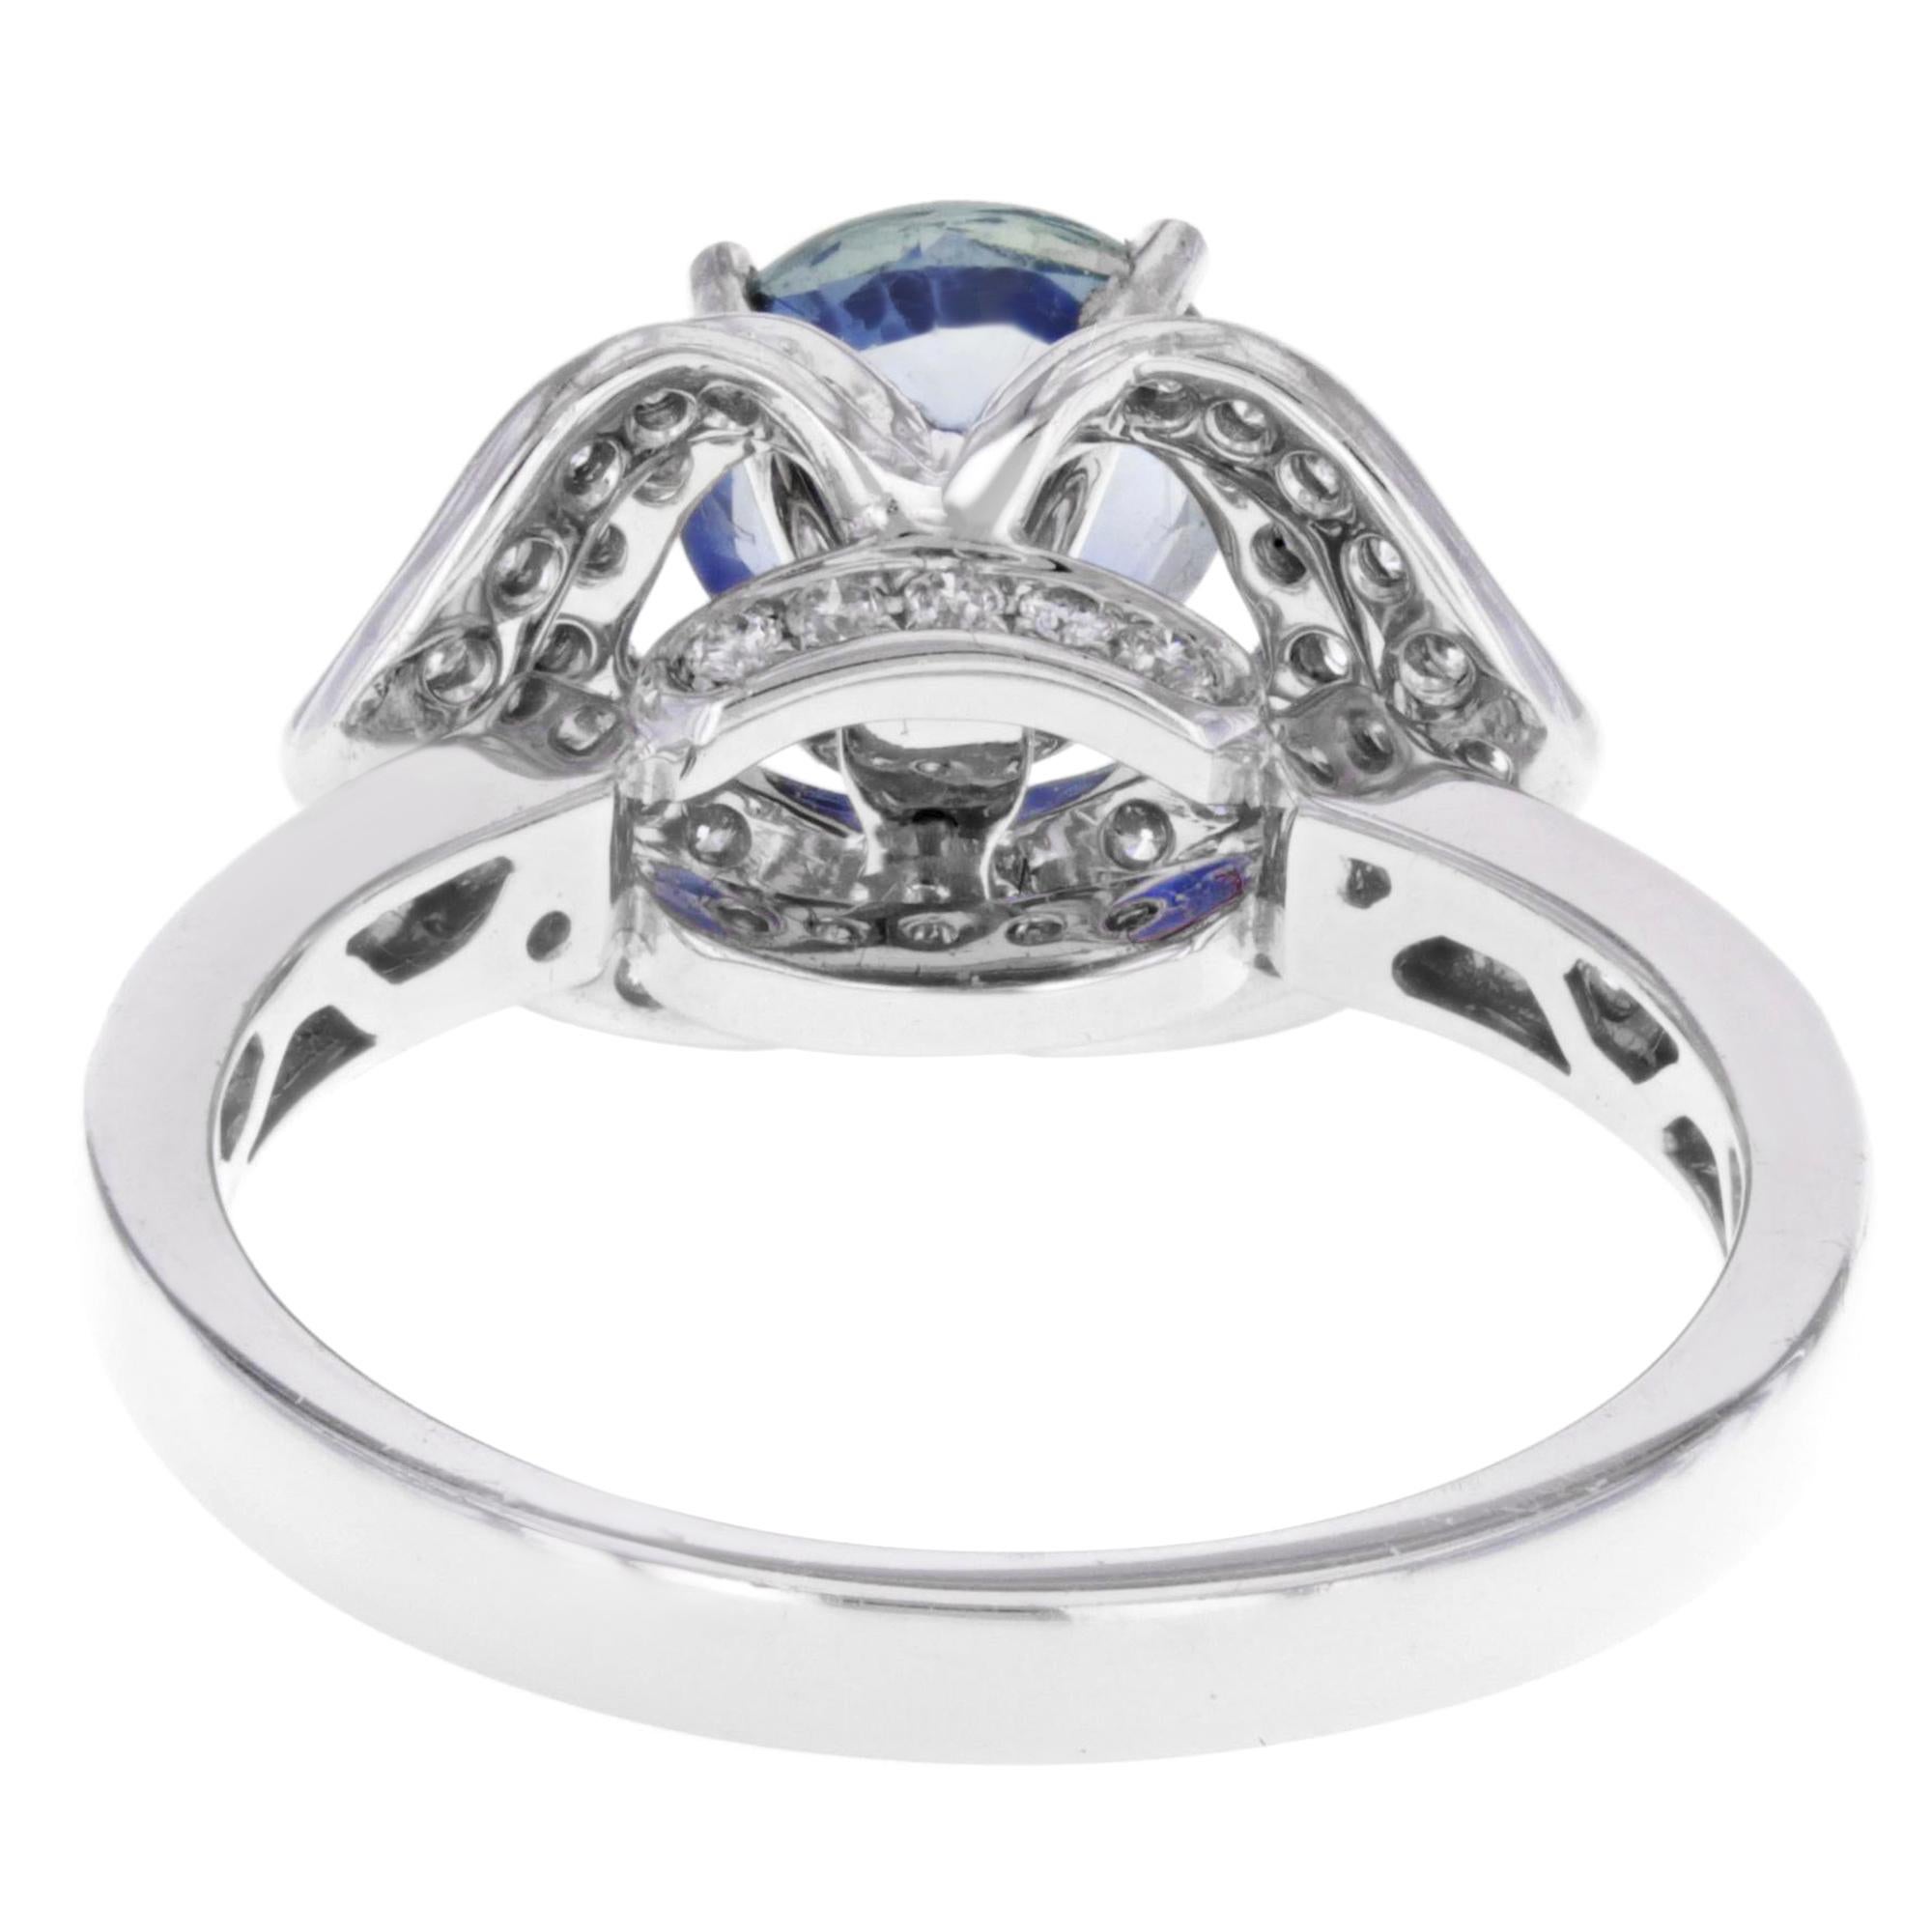 Rachel Koen Round Sapphire Diamond Ring 18K White Gold 1.5 Cttw In New Condition For Sale In New York, NY